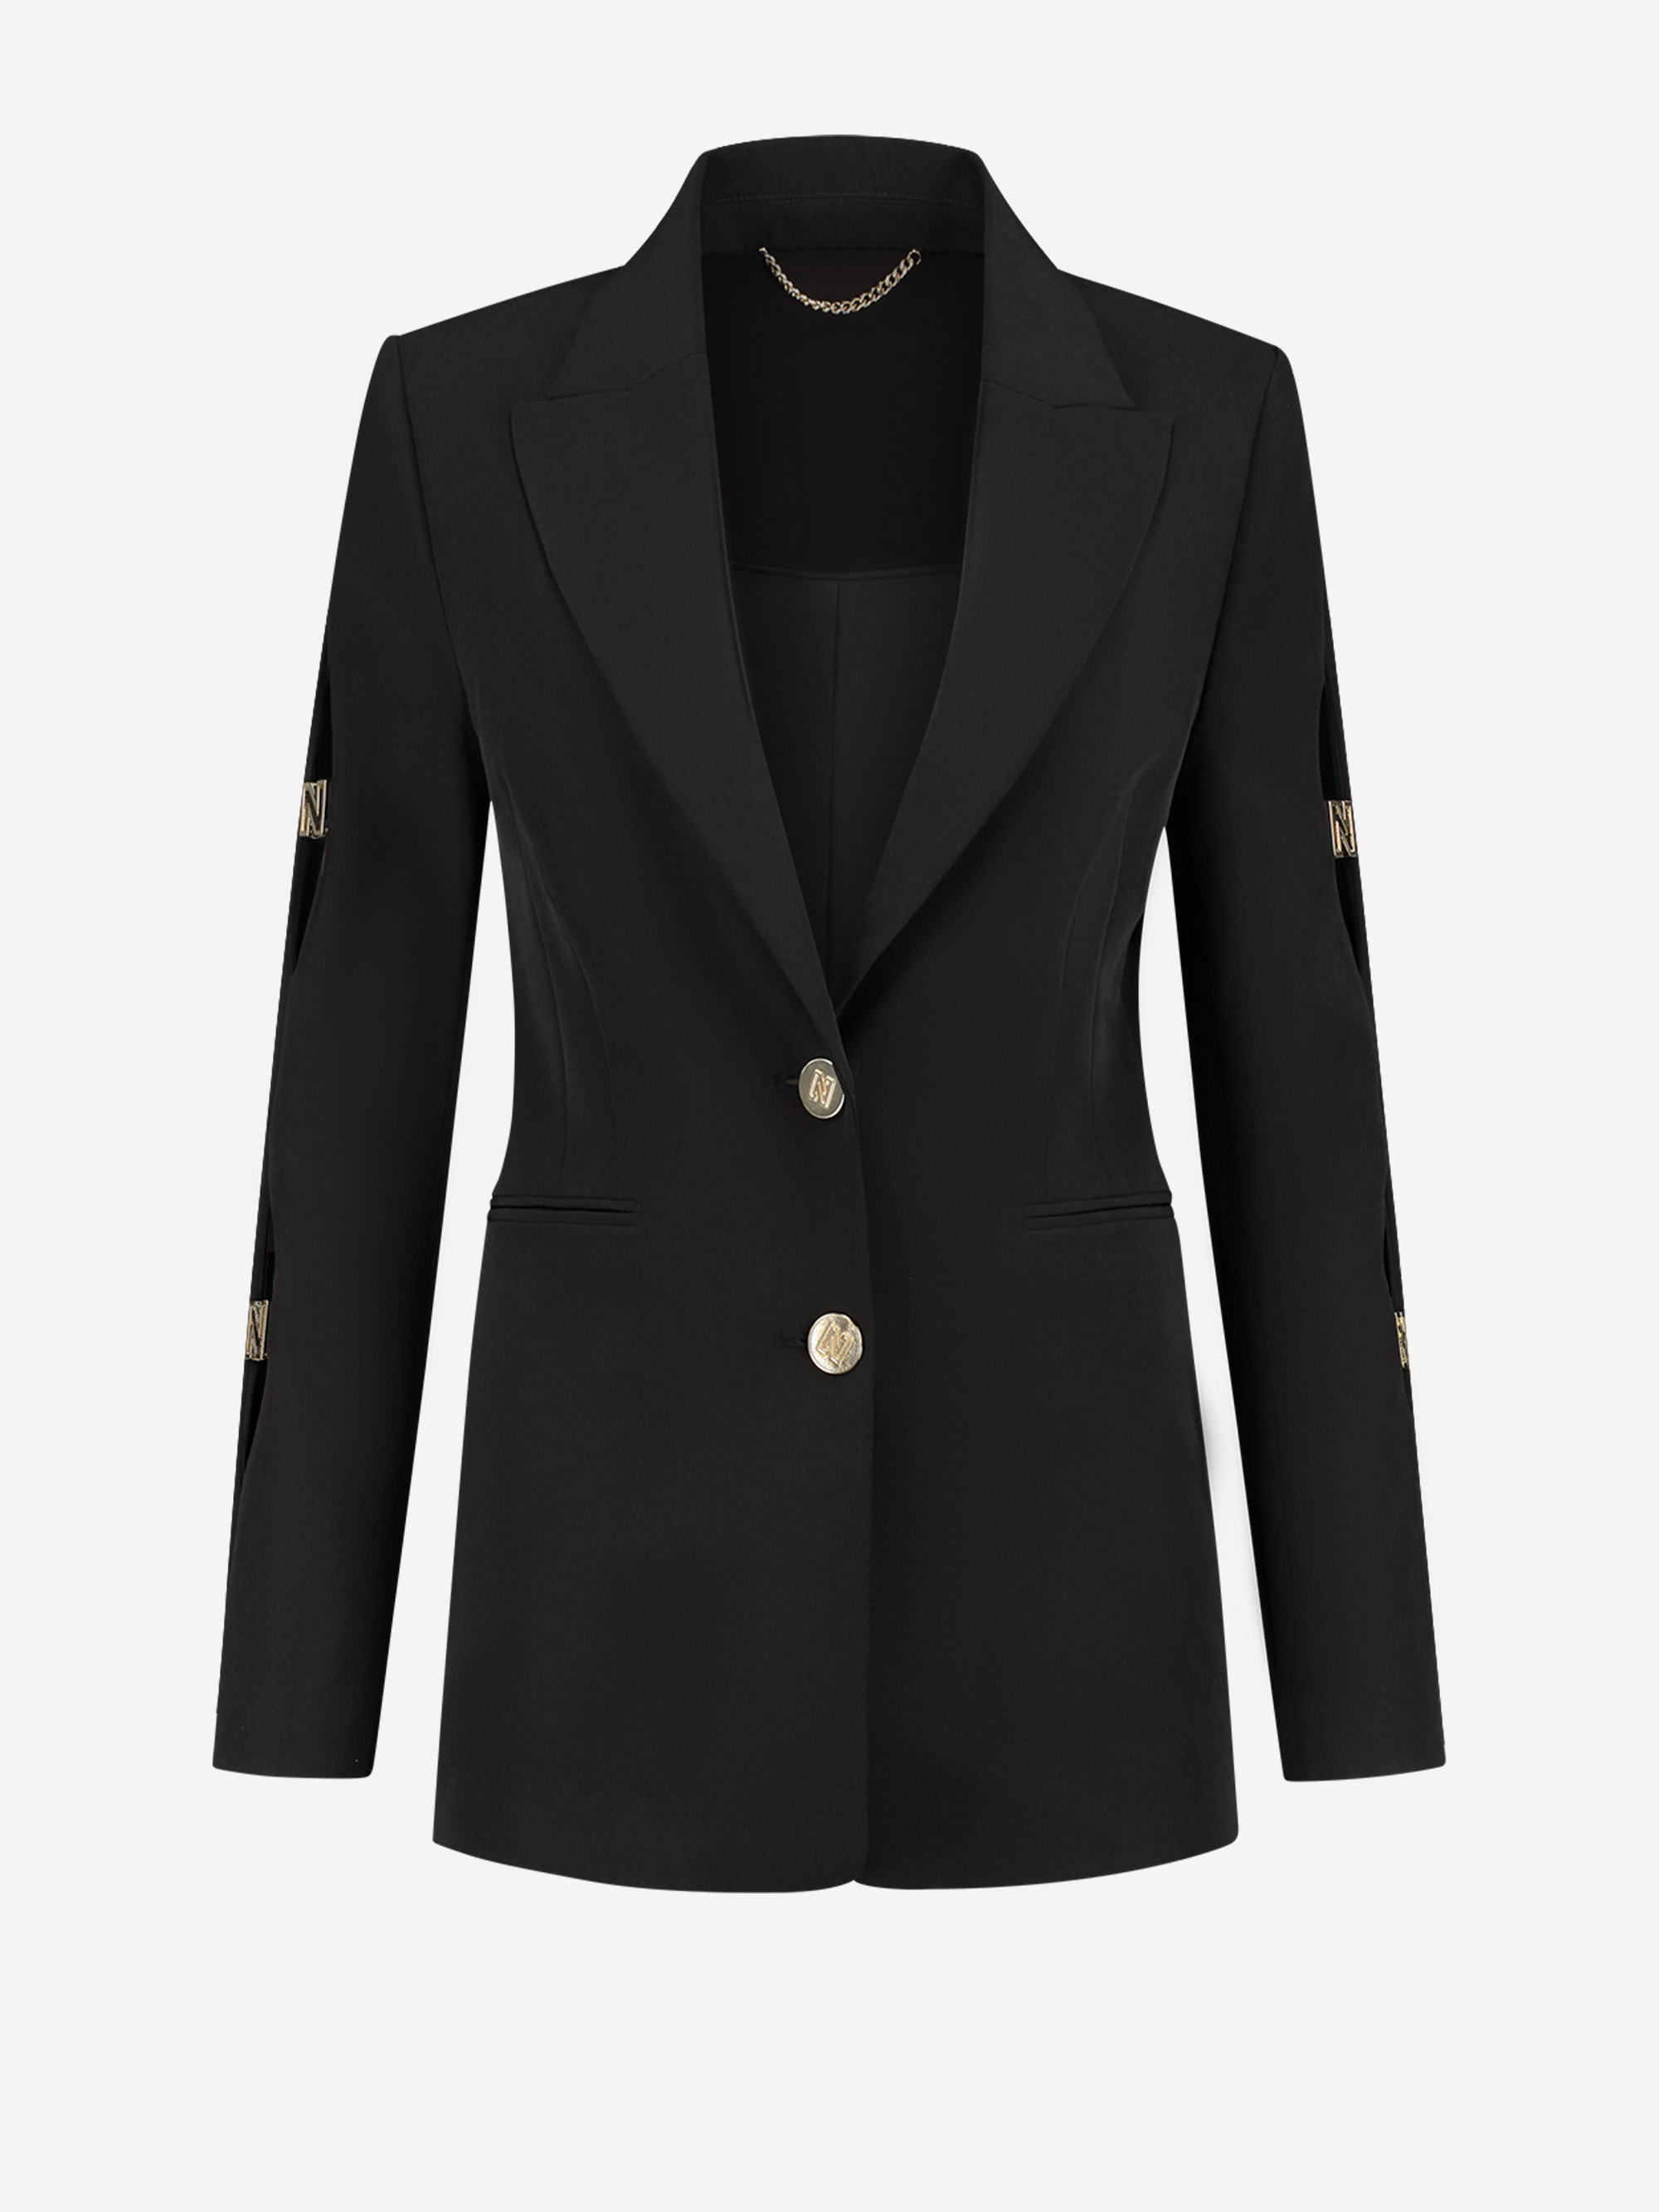 Blazer with open sleeves and N logo